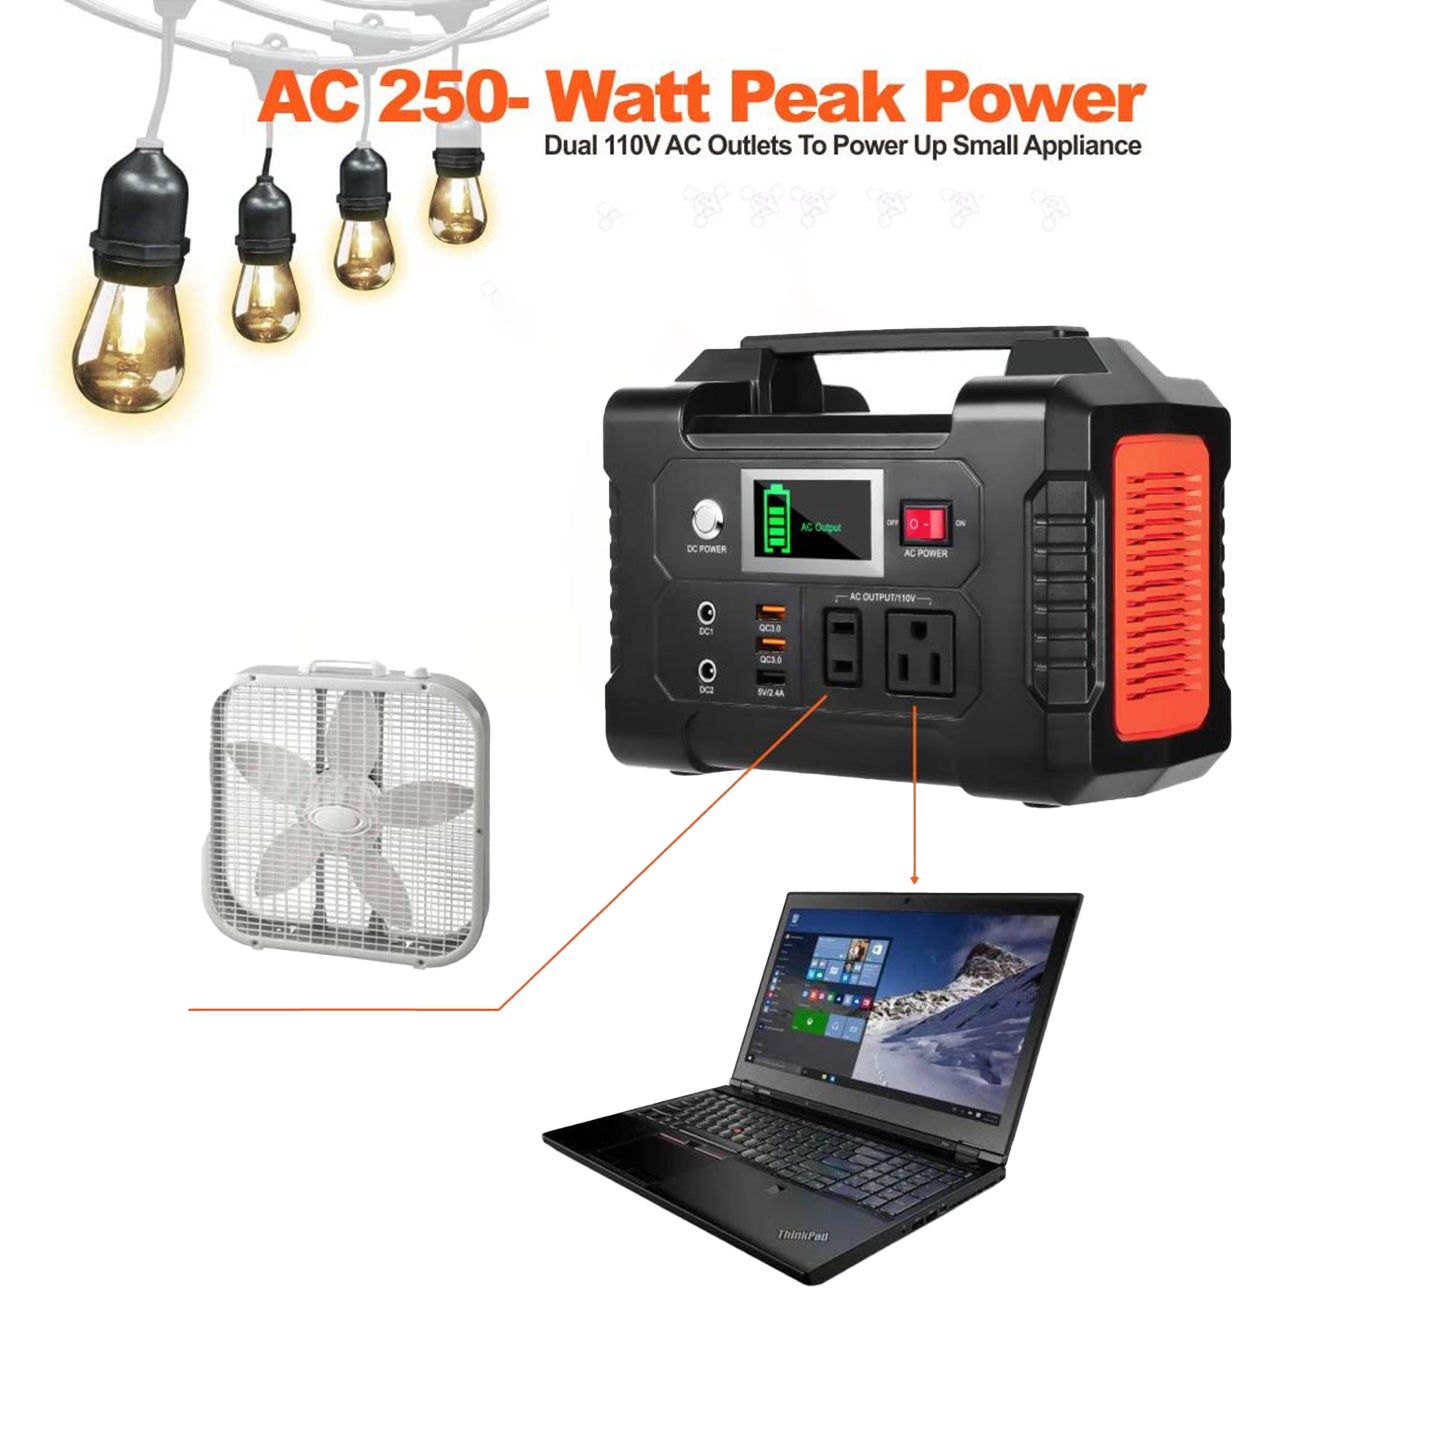 AC 250 - watt peak power, Dual AC outlet to power up small appliances, portable power station, Flashfish e200, outdoor power supply, emergency power, battery backup, renewable energy, camping gear, off-grid living, power station review, eco-friendly gadgets, travel essentials, portable charger, adventure gear, sustainable living, tech review, power bank, Flashfish power station, energy storage, solar compatible, outdoor technology, gadget review